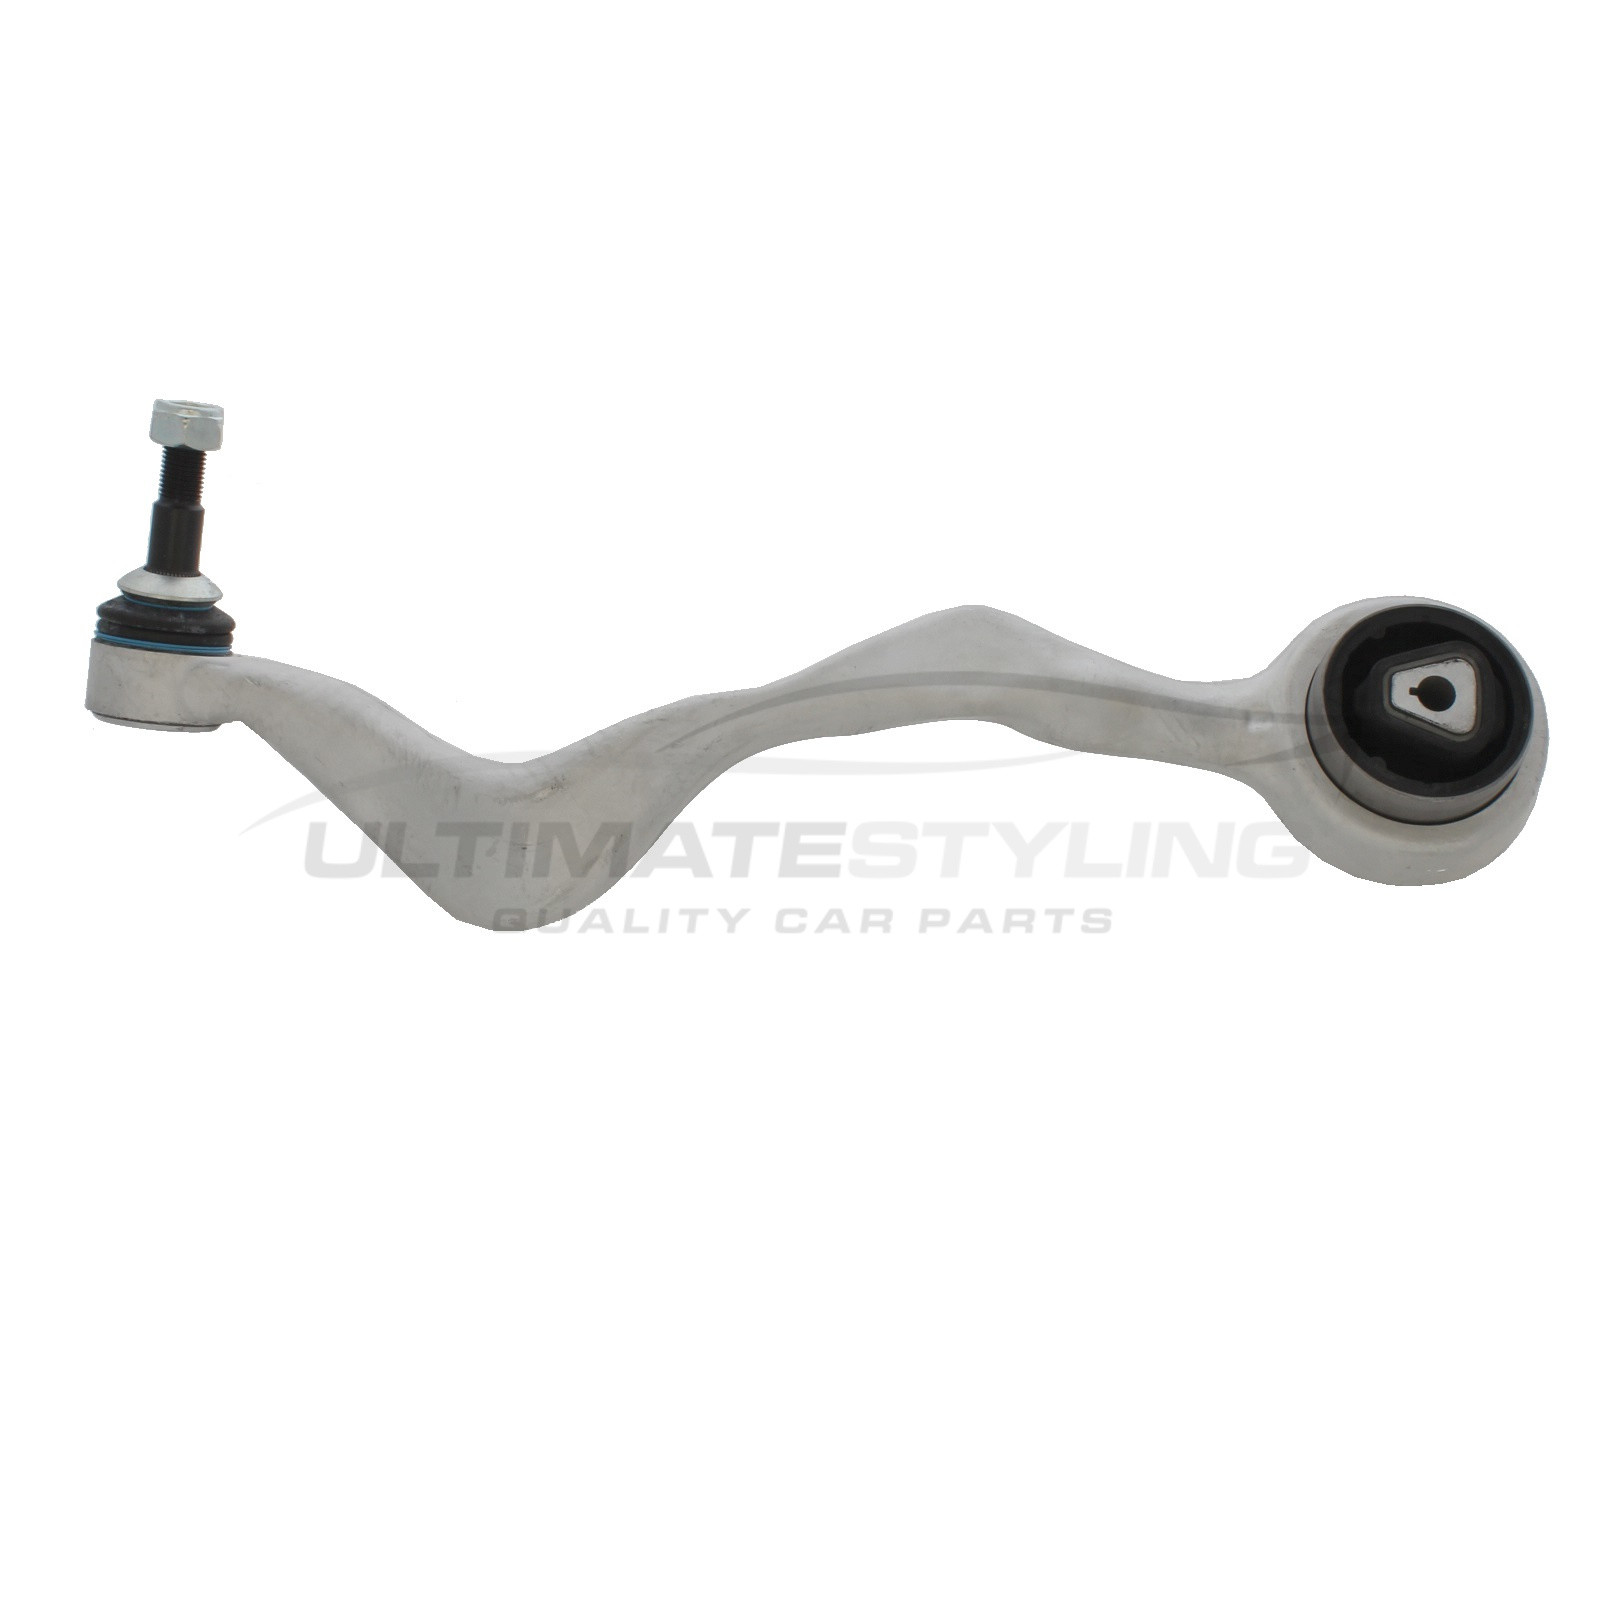 BMW 1 Series 2004-2014, BMW 3 Series 2005-2013, BMW X1 2009-2016, BMW Z4 2009-2017 Front Lower Suspension Arm (Alloy) Including Ball Joint and Rear Bush (Front of Wheel) Passenger Side (LH)